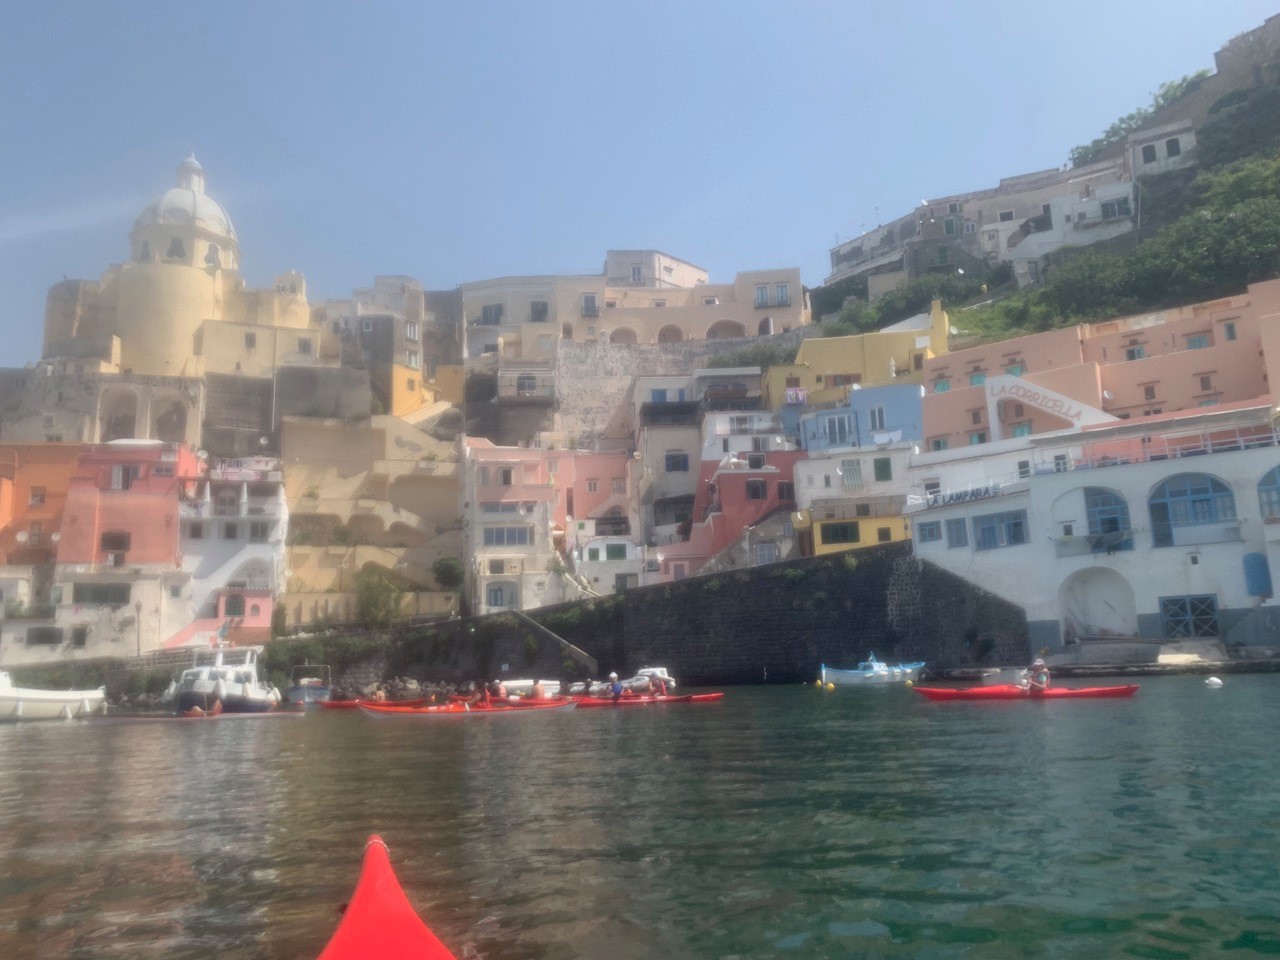 A scenic view of Procida from the water.